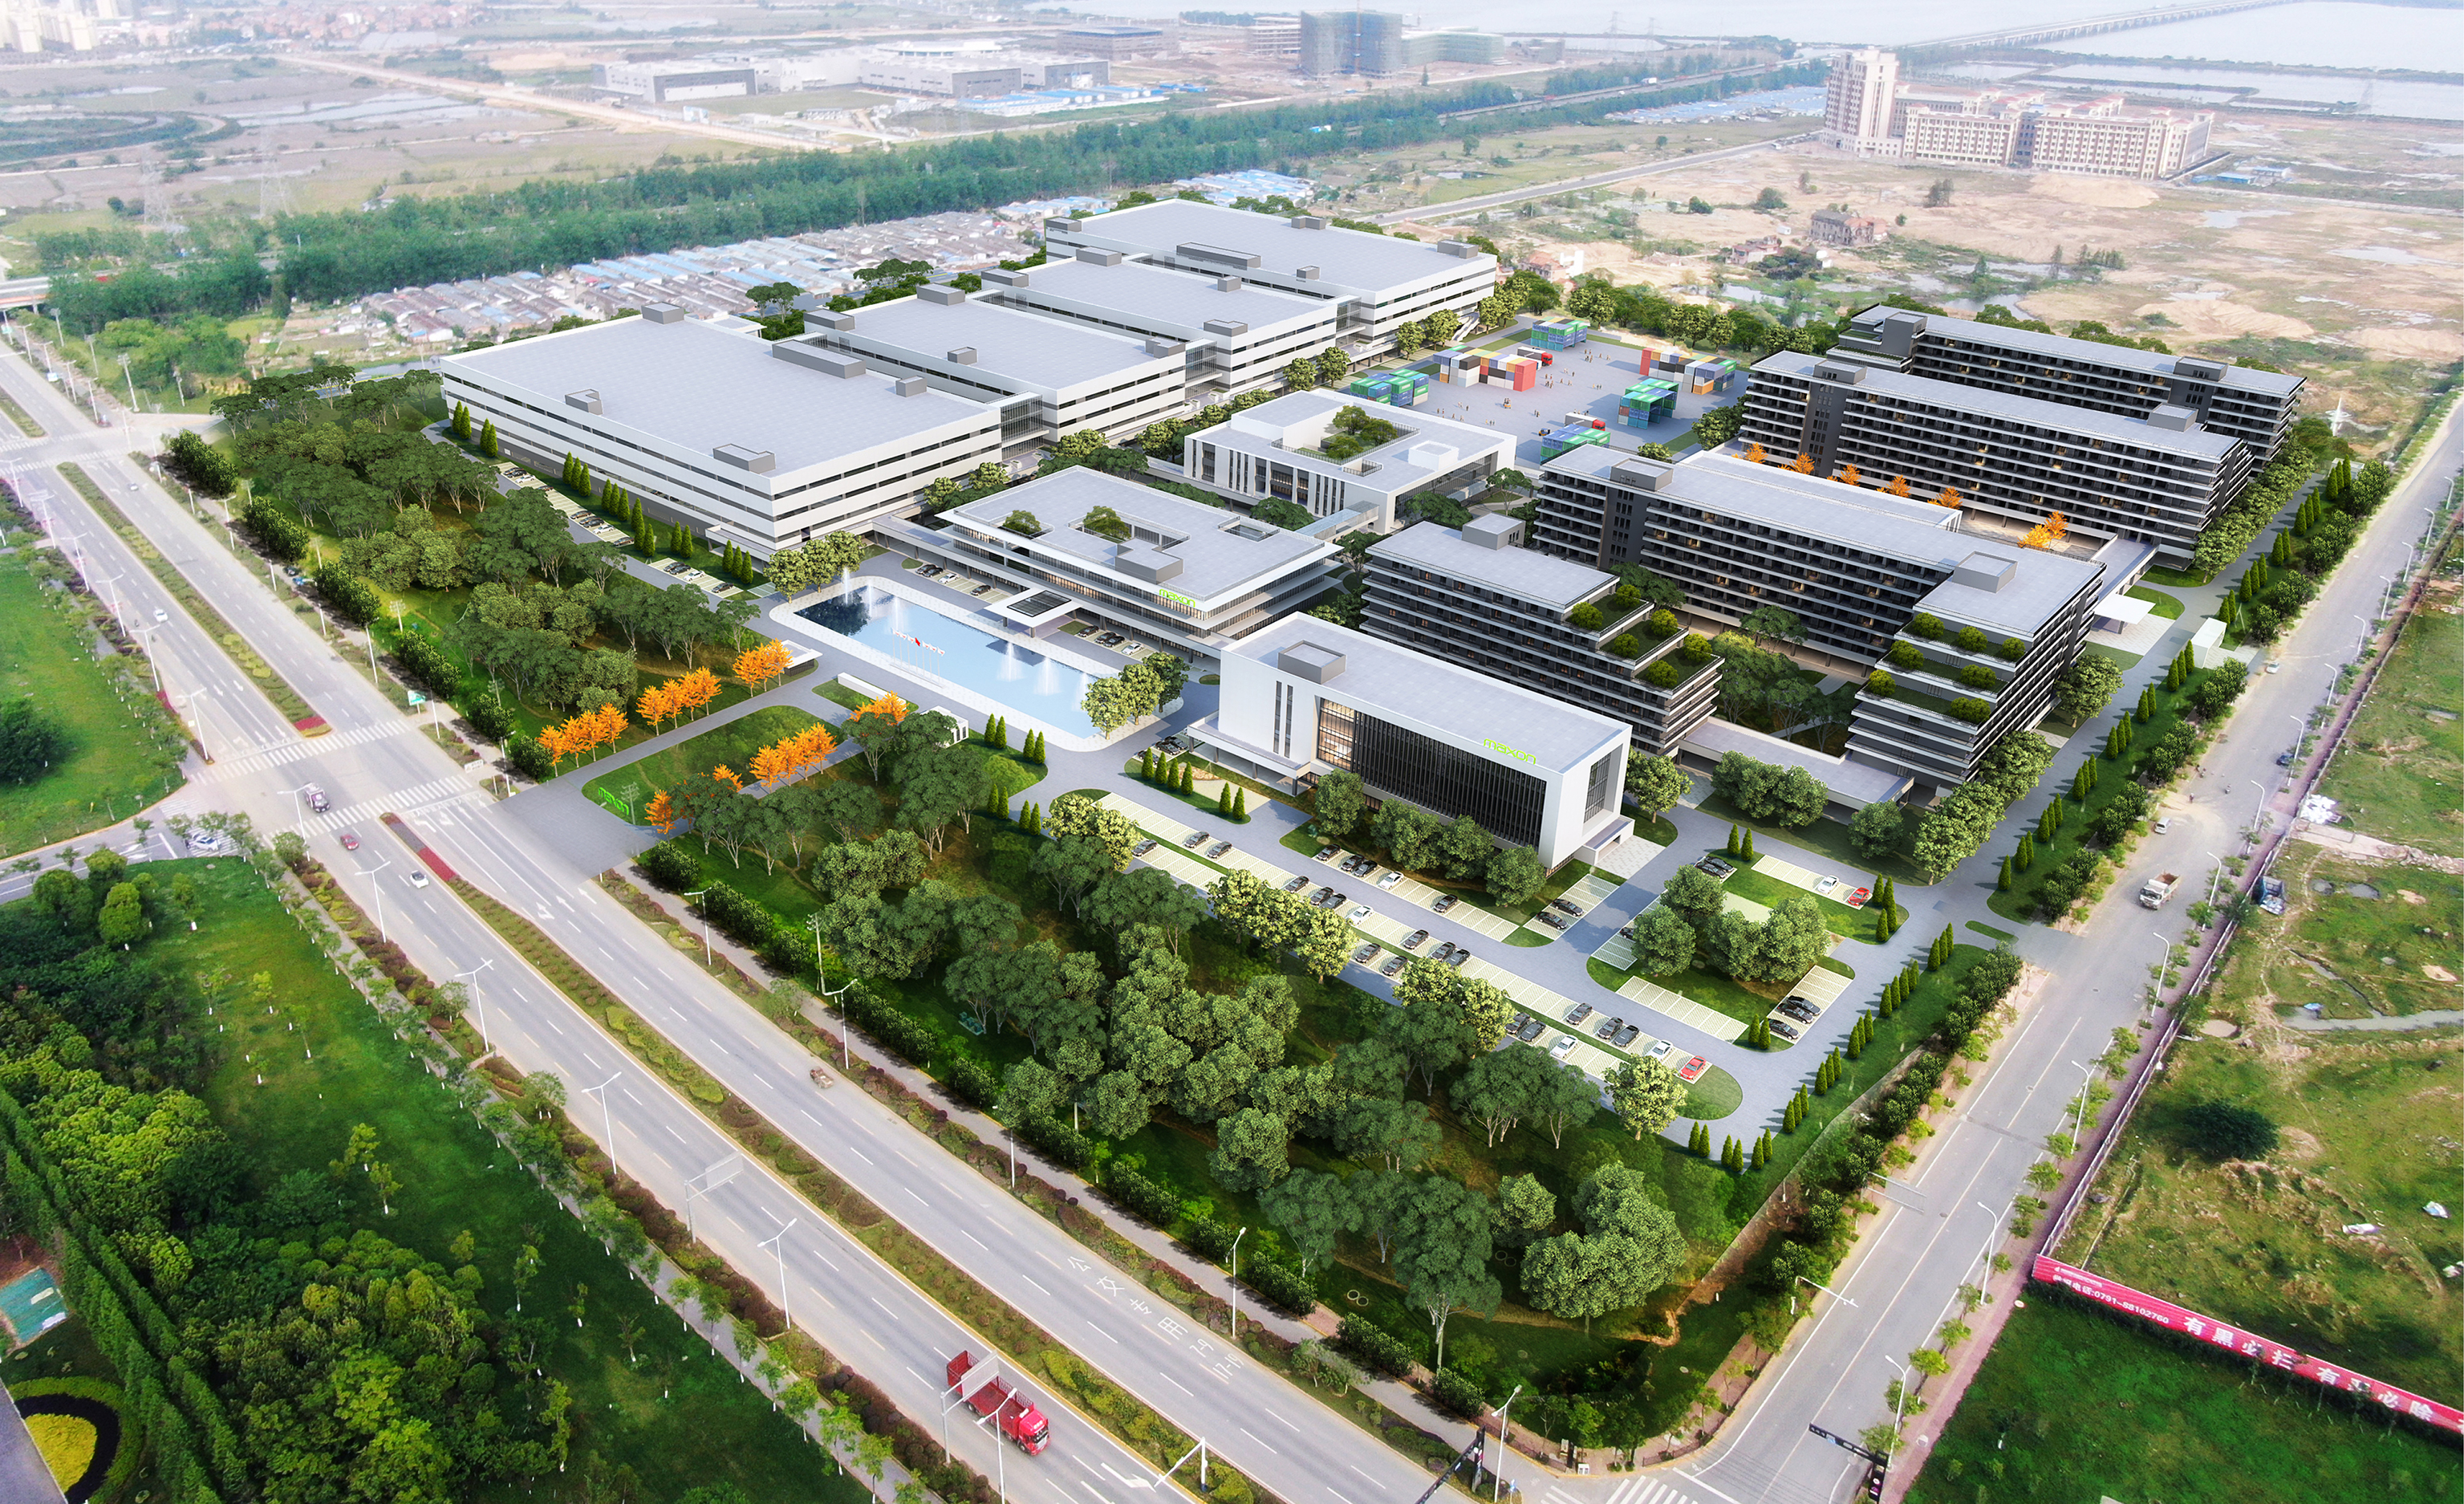 The core manufacturing base of Tinno launched & the largest R&D base established outside Shenzhen.